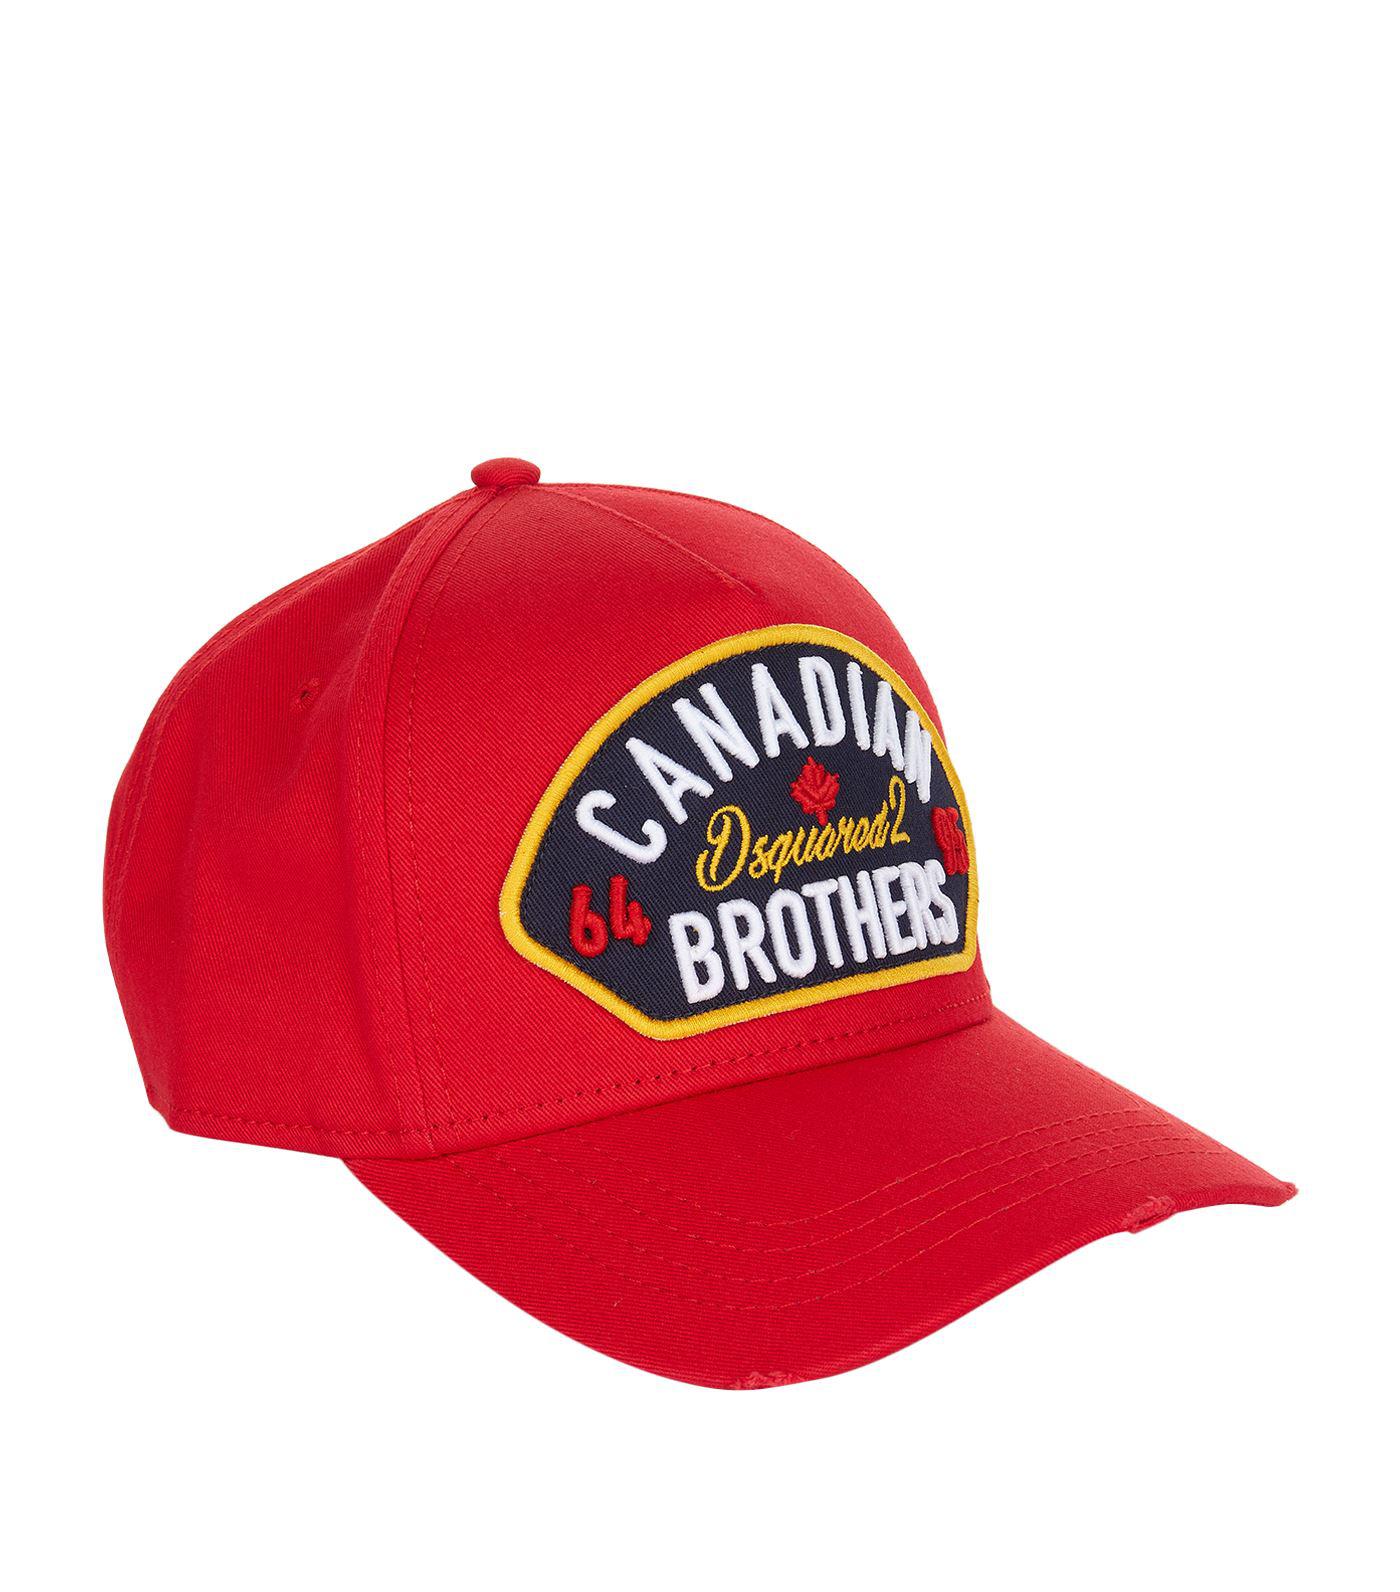 dsquared brothers cap